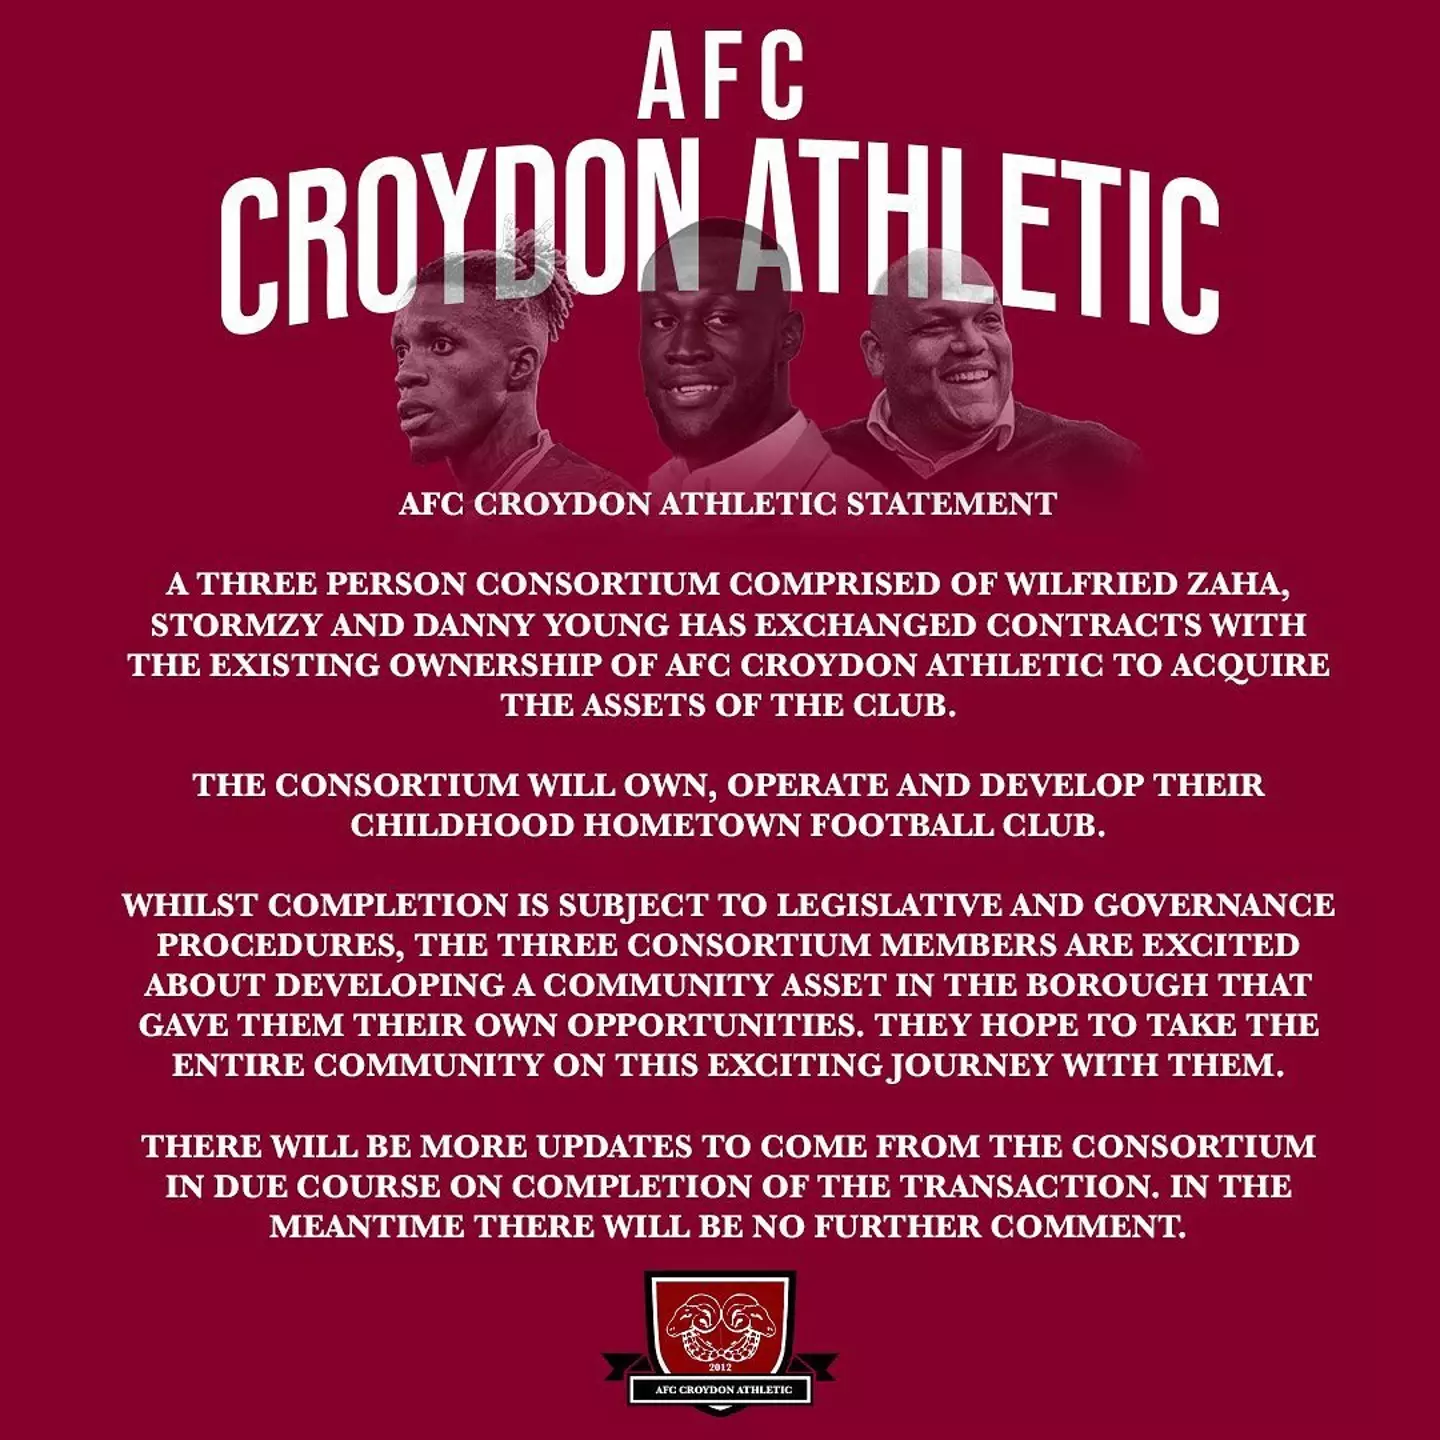 The 'Vossi Bop' hit-maker shared the AFC Croydon Athletic statement to his Instagram this afternoon.